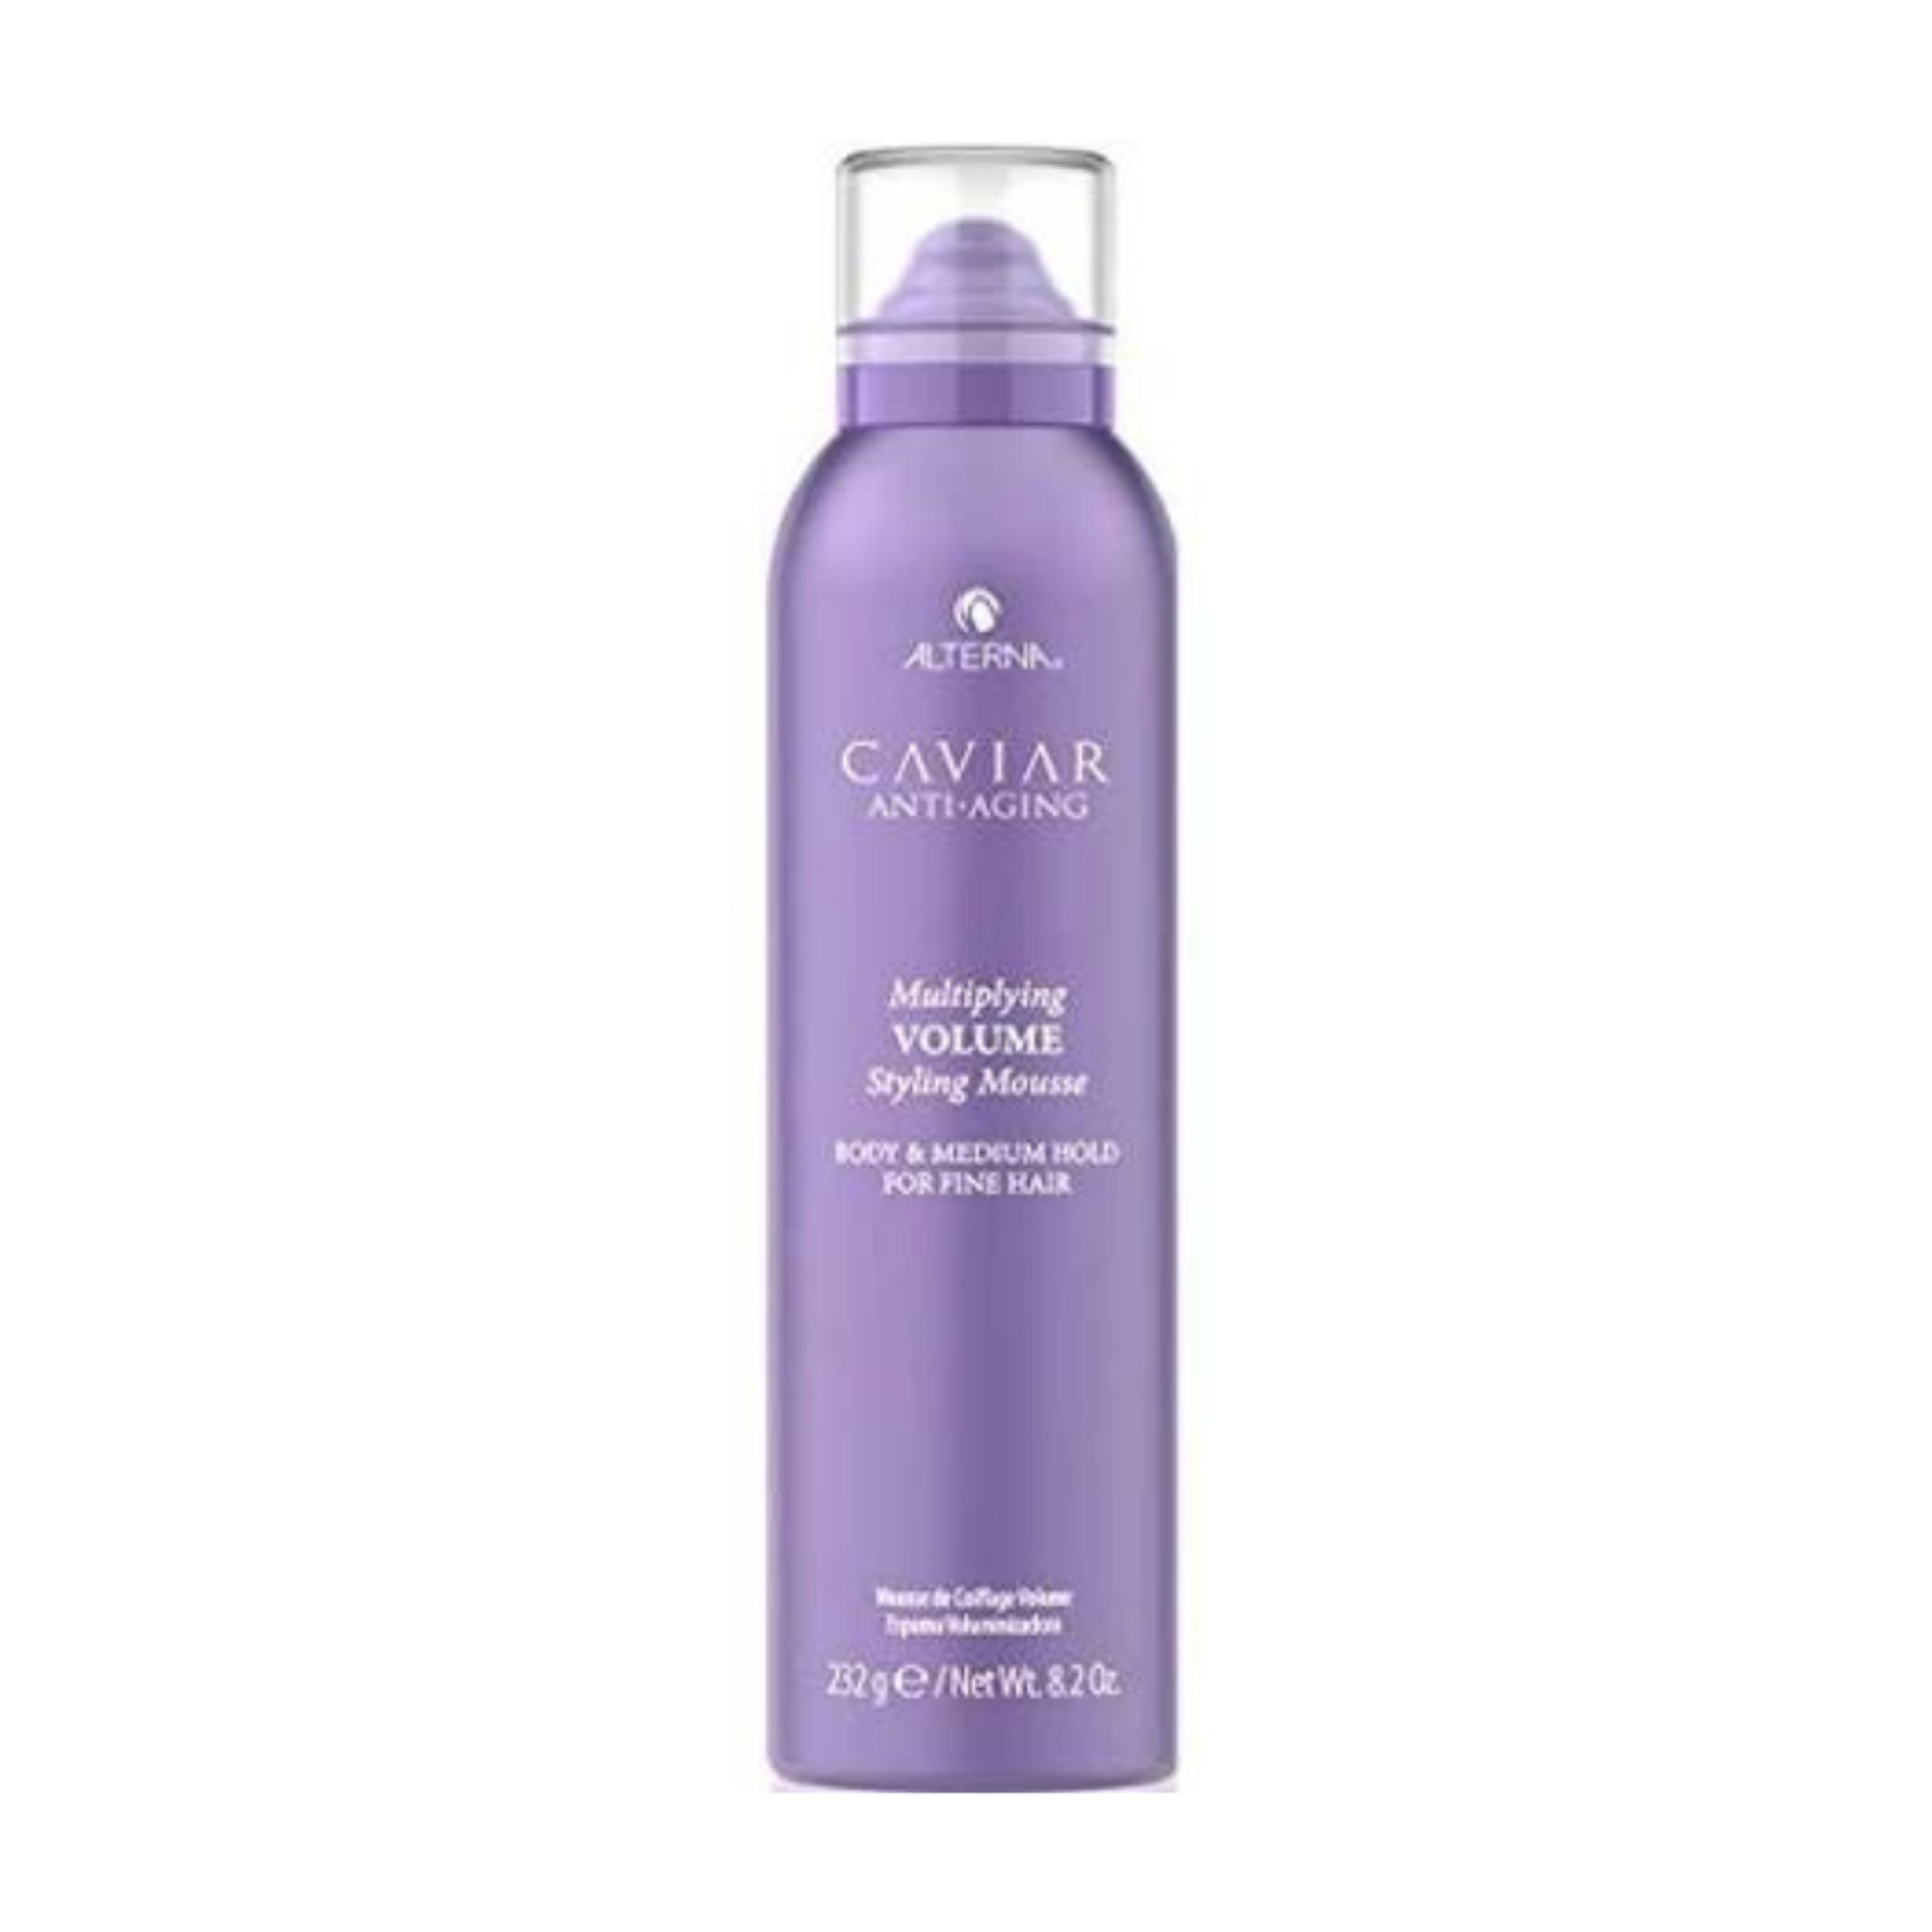 Anti-Aging Multiplying Volume Styling Mousse